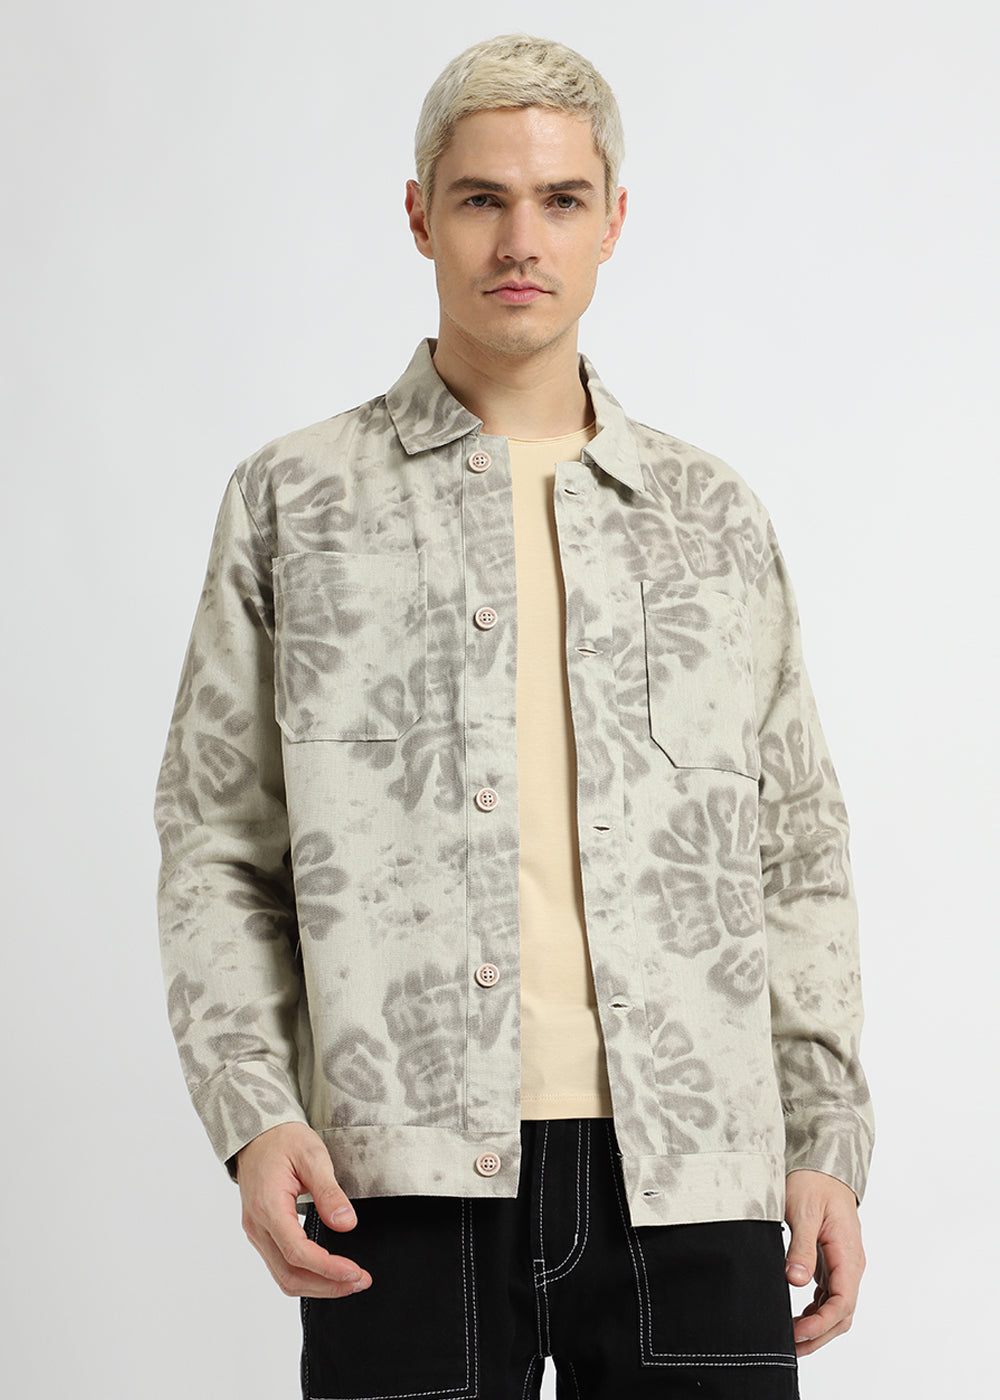 Abstract Floral Summer Jacket